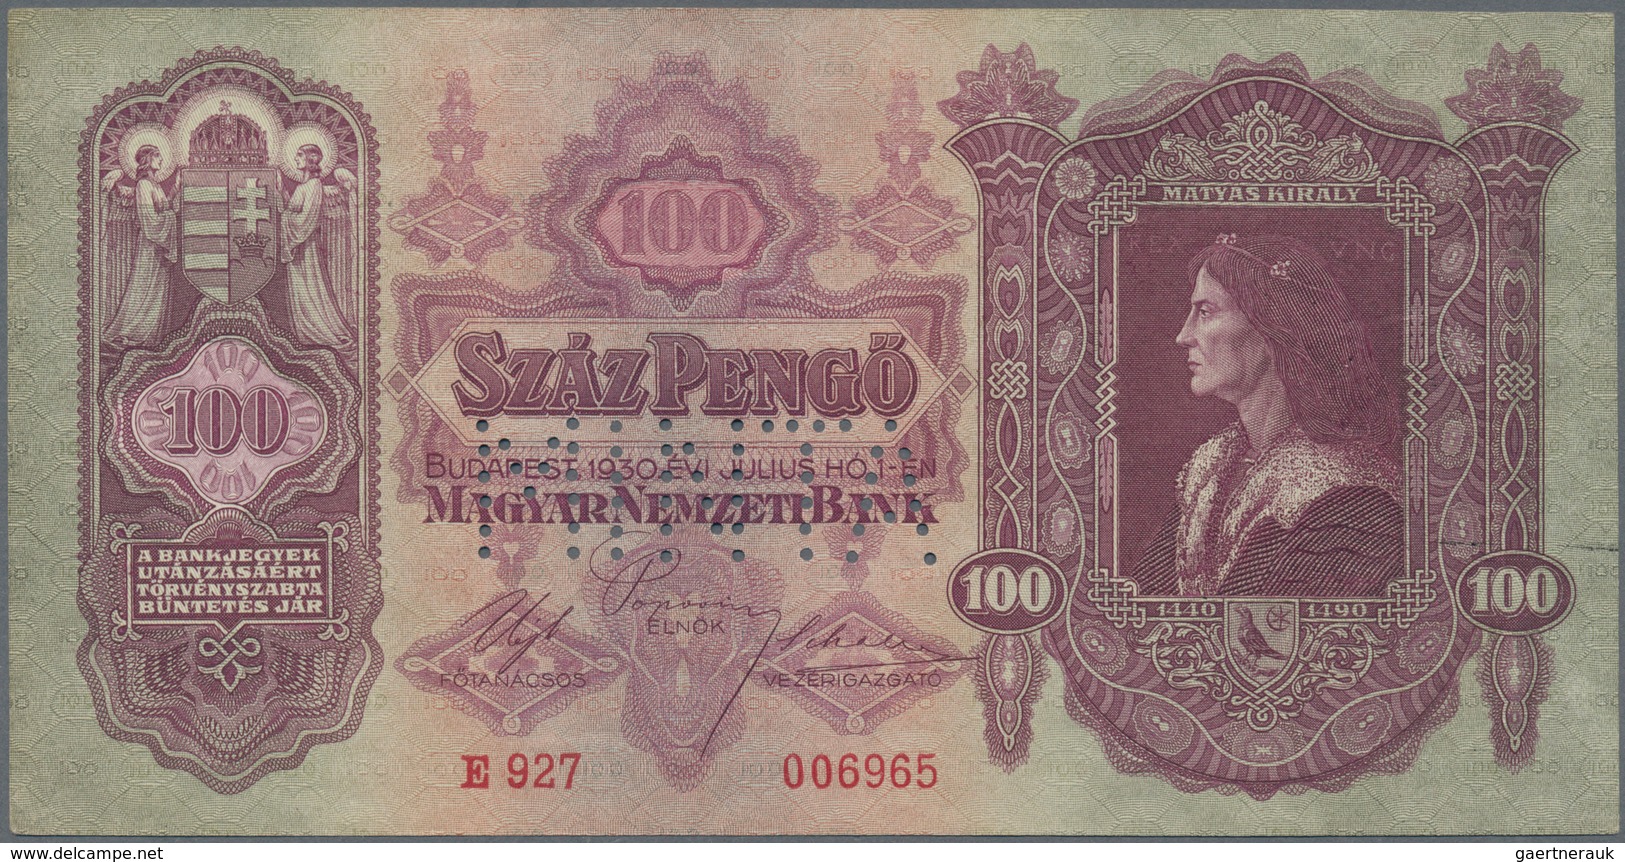 01701 Hungary / Ungarn: 100 Pengö 1930 Specimen, P.112s With Perforation "MINTA", Some Minor Creases And L - Hungary